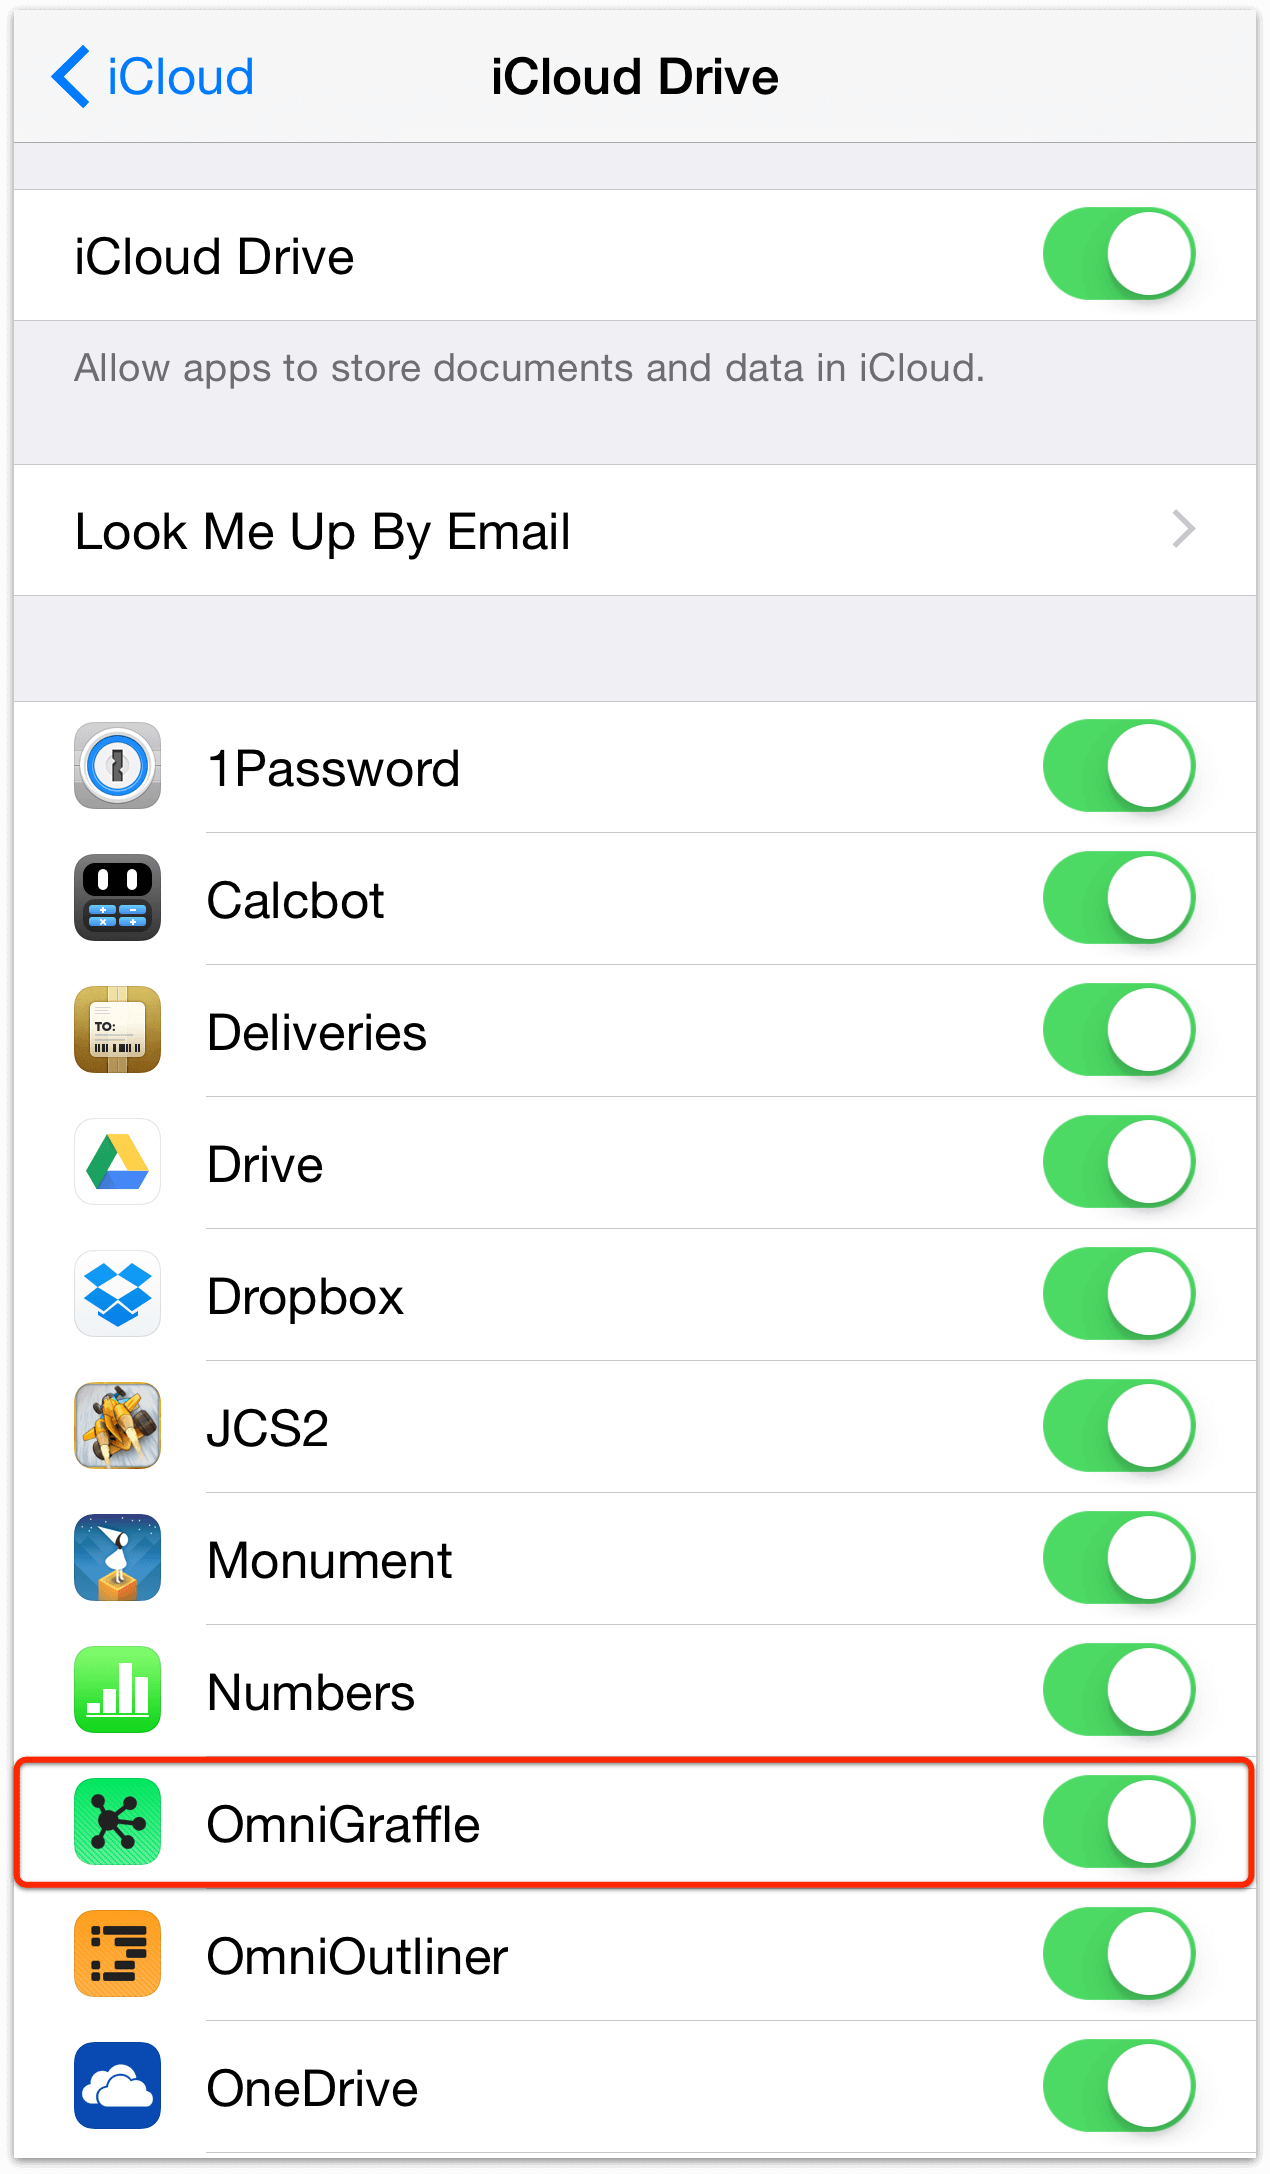 The iCloud Drive screen, showing the list of apps storing documents and data in iCloud